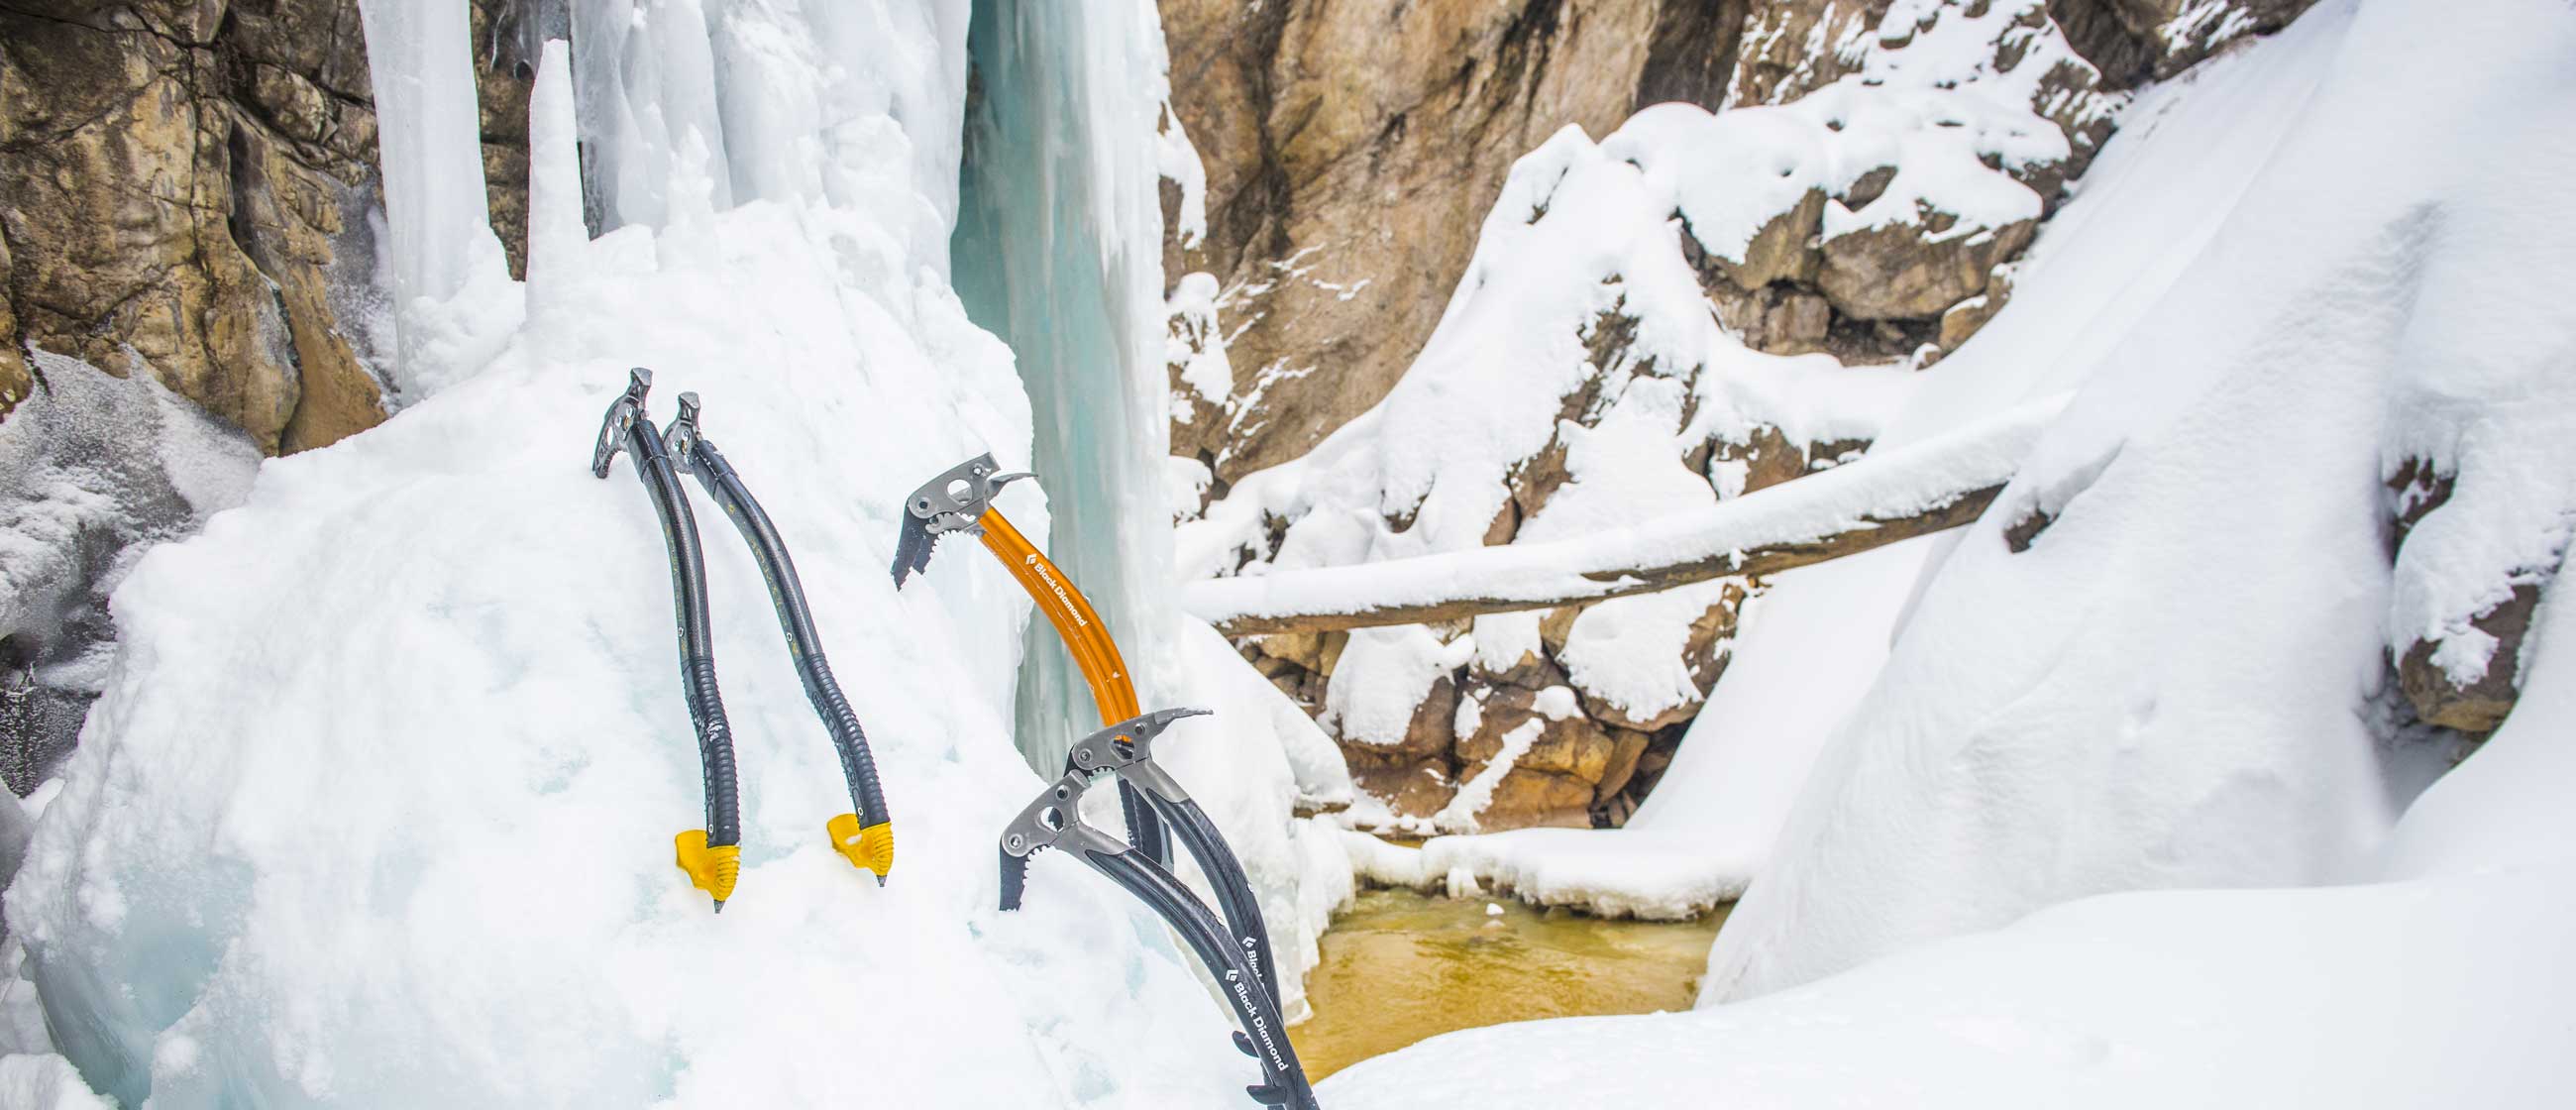 Location: Ouray Ice Park. Photo Credit: Ian Matteson